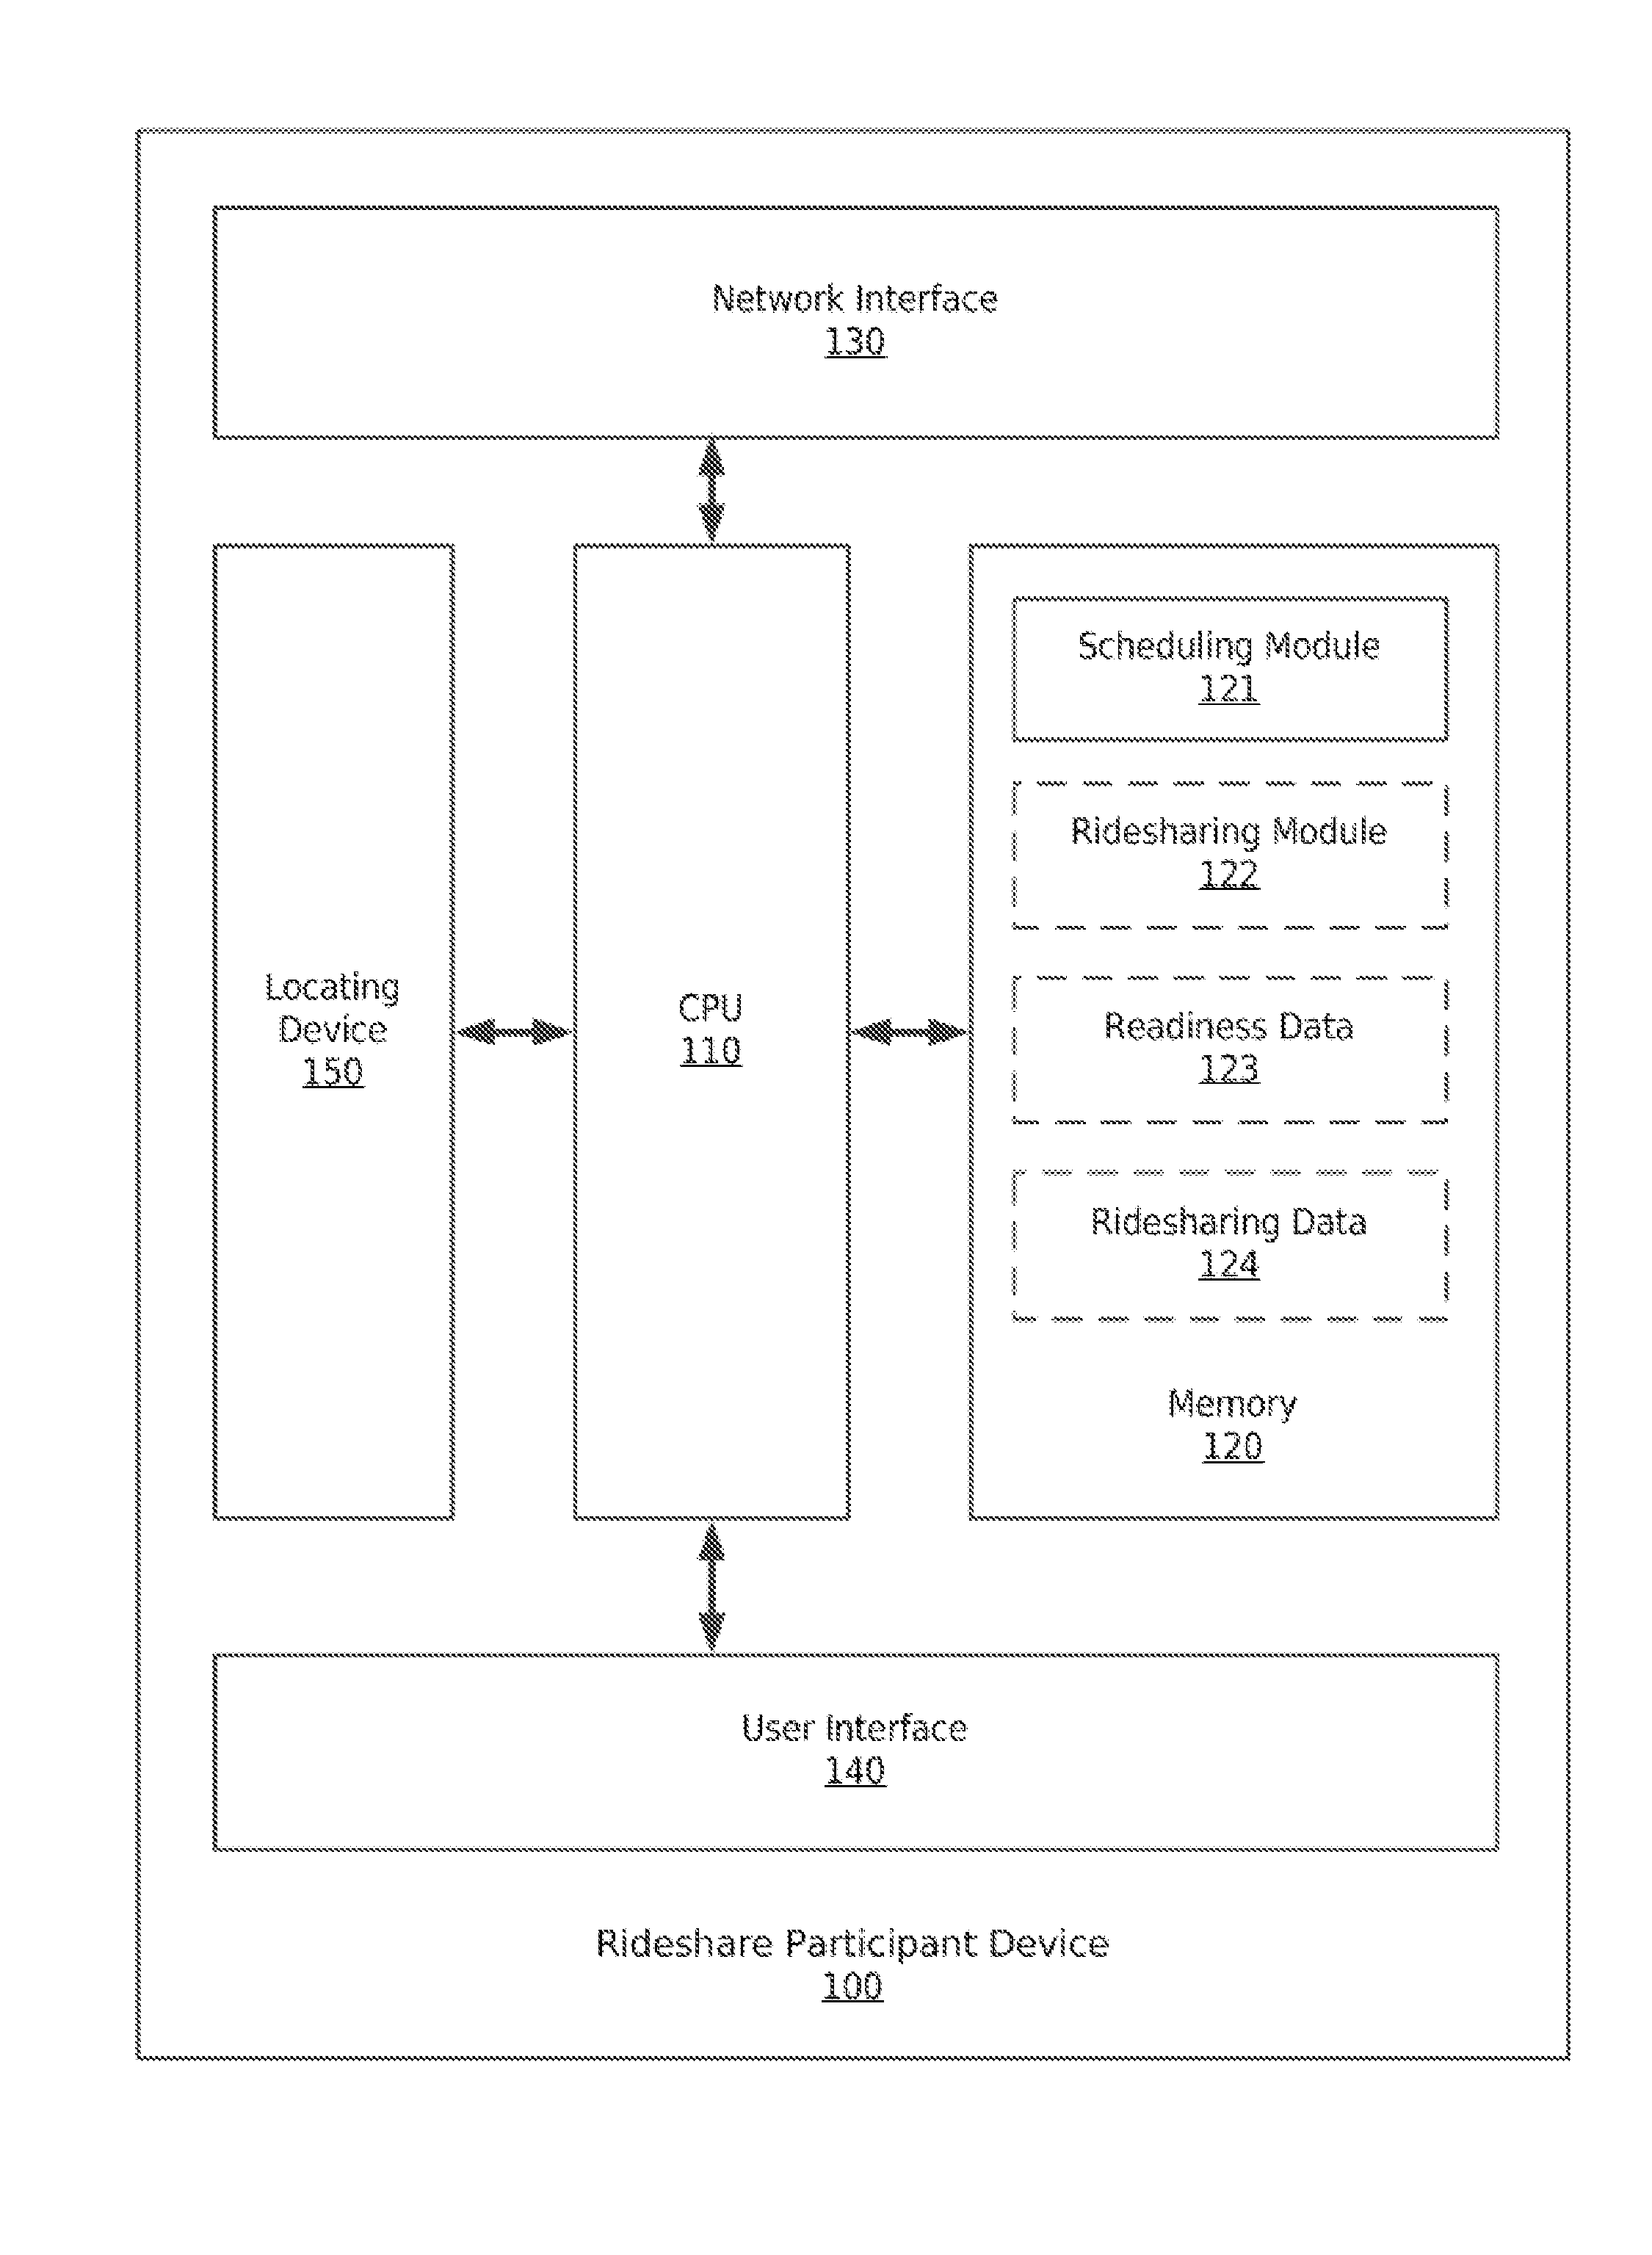 Method for facilitating automatic scheduling of a rideshare trip